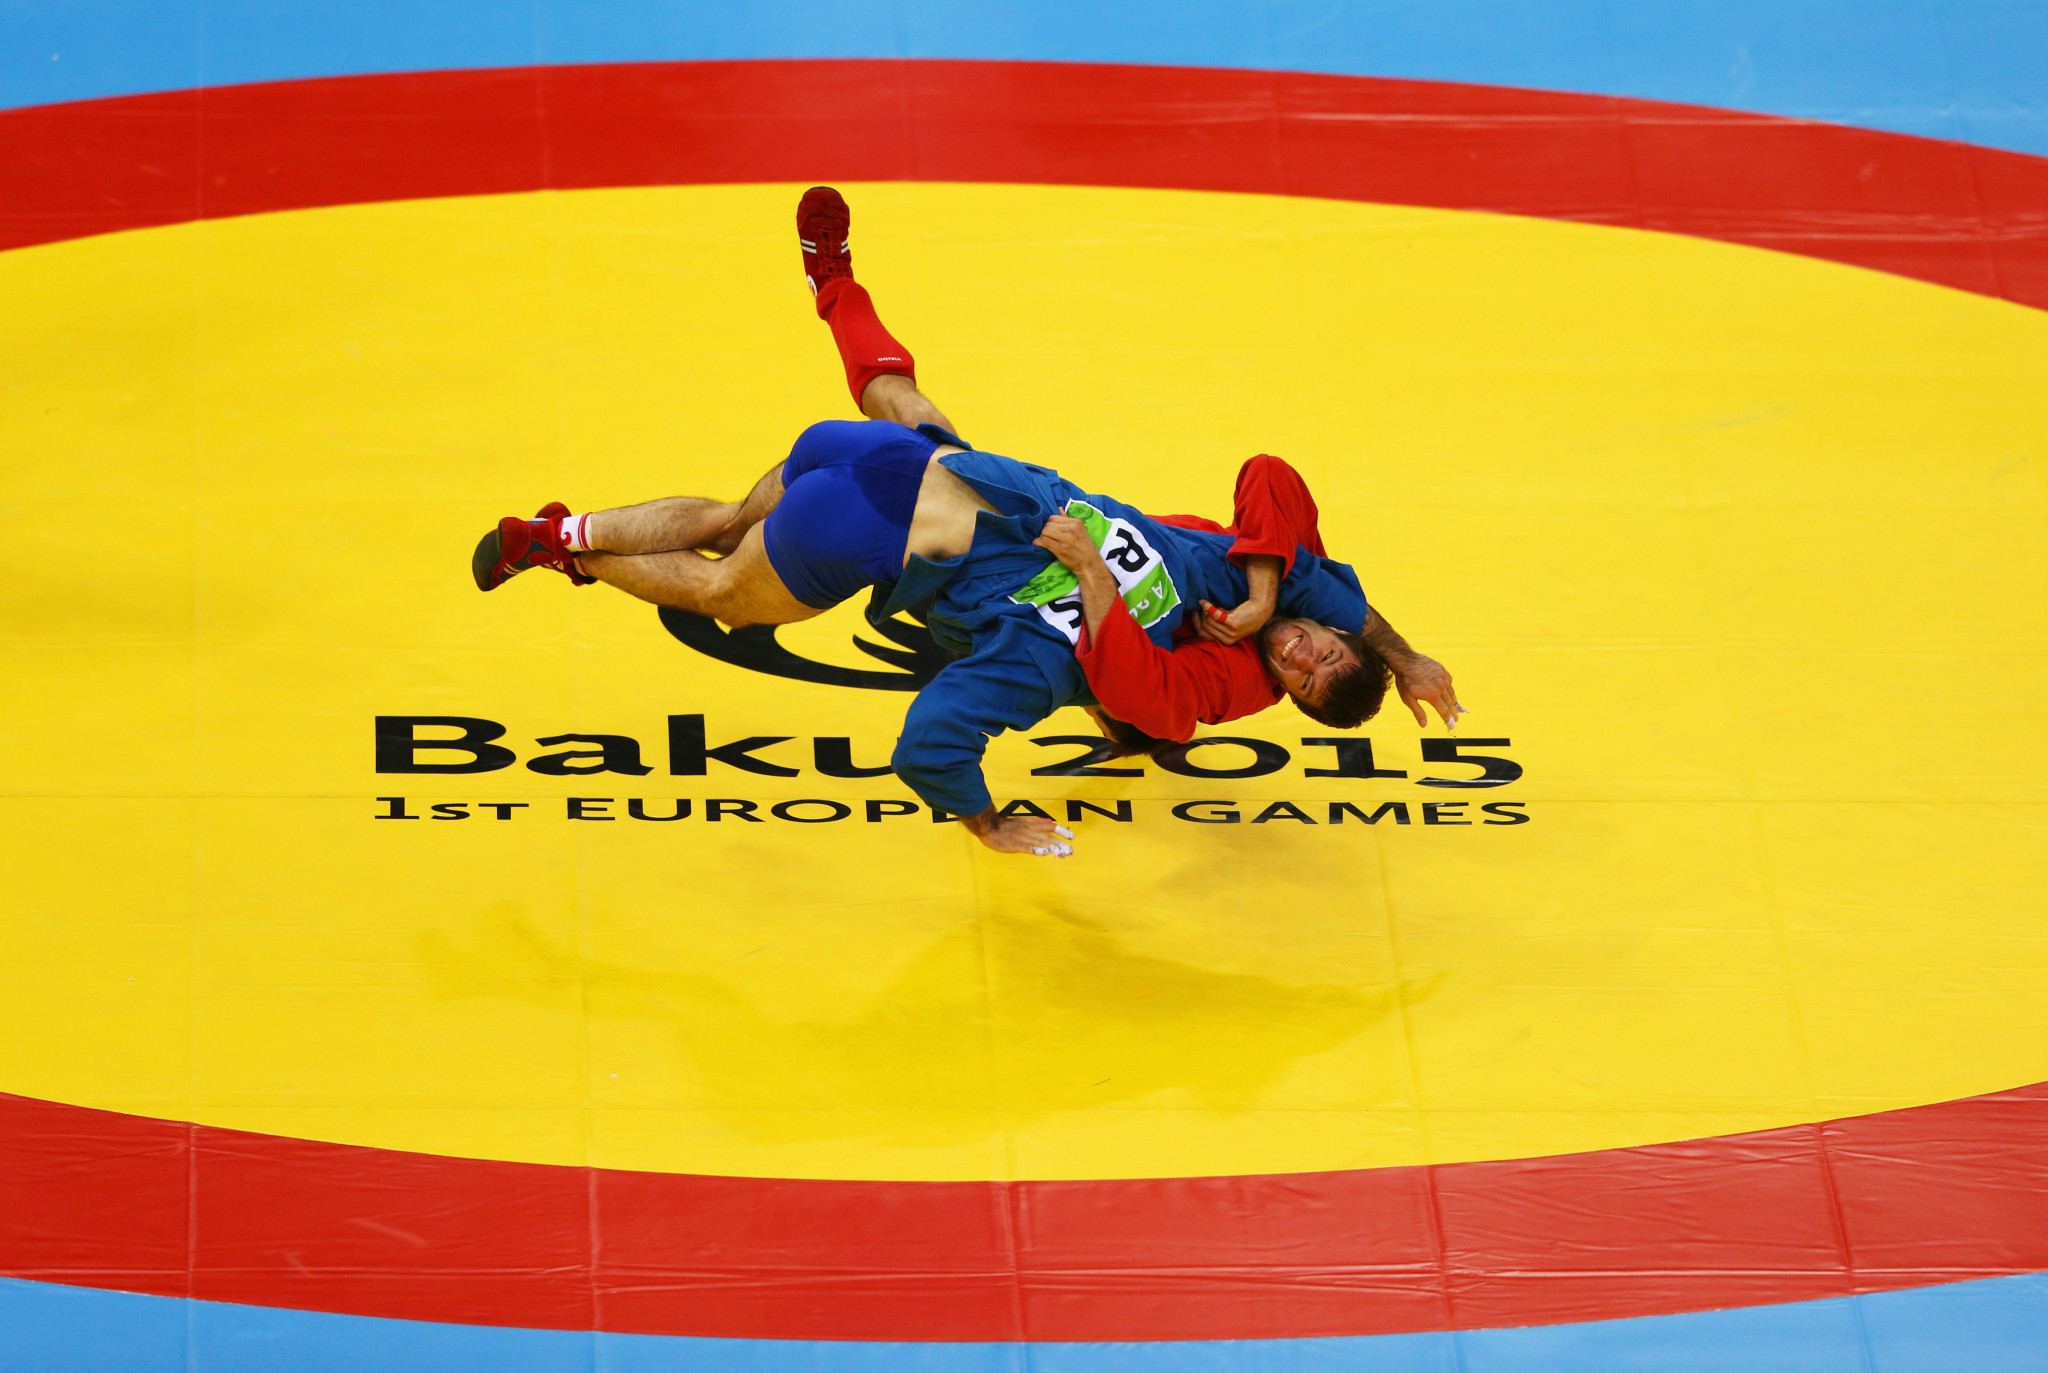 Sambo was part of the programme when Baku hosted the first European Games in 2015 ©Getty Images